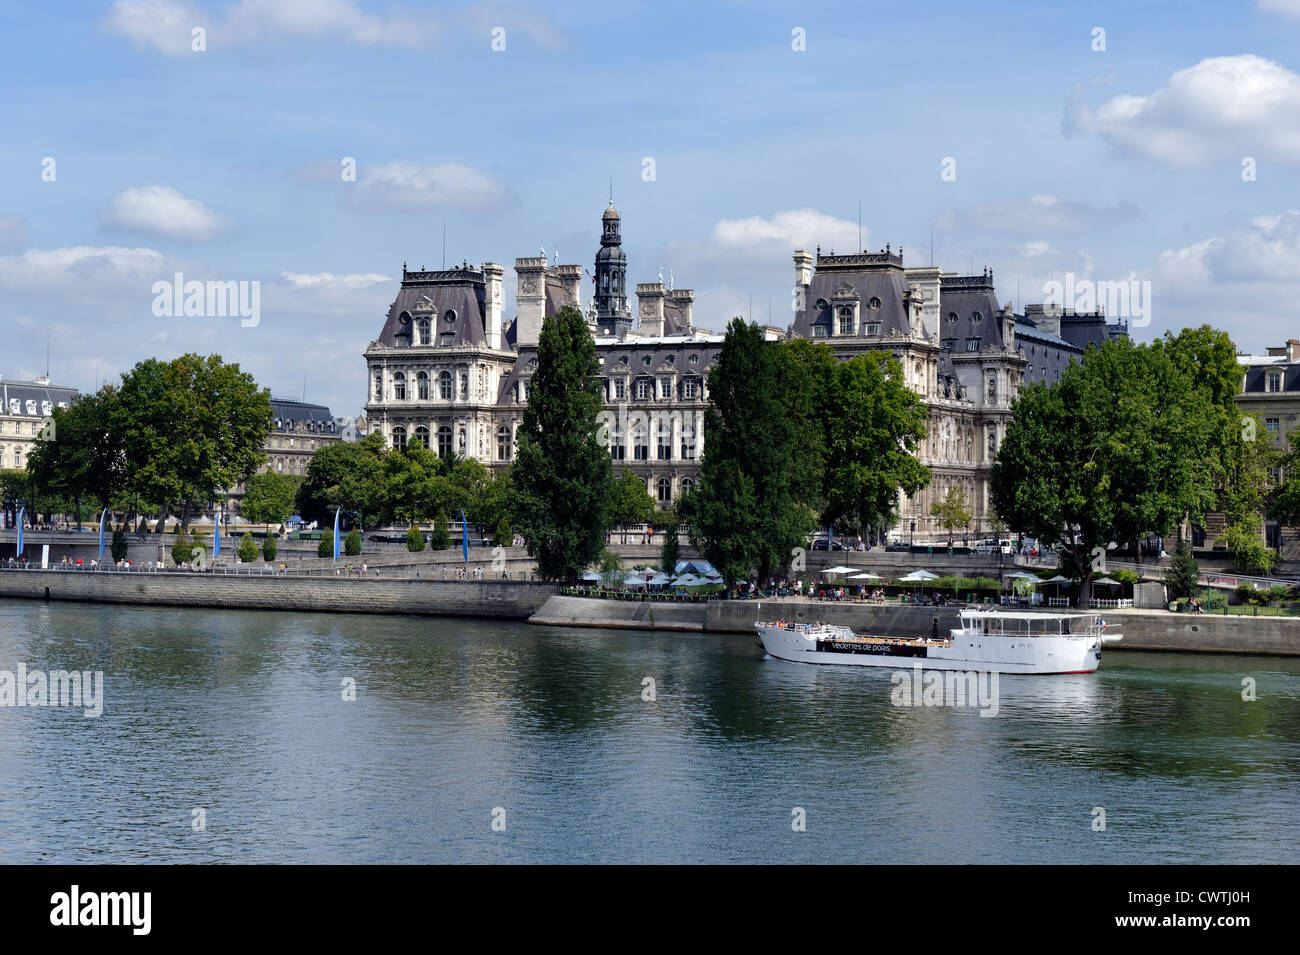 Classical building French architecture alongside the River Seine in Paris Stock Photo